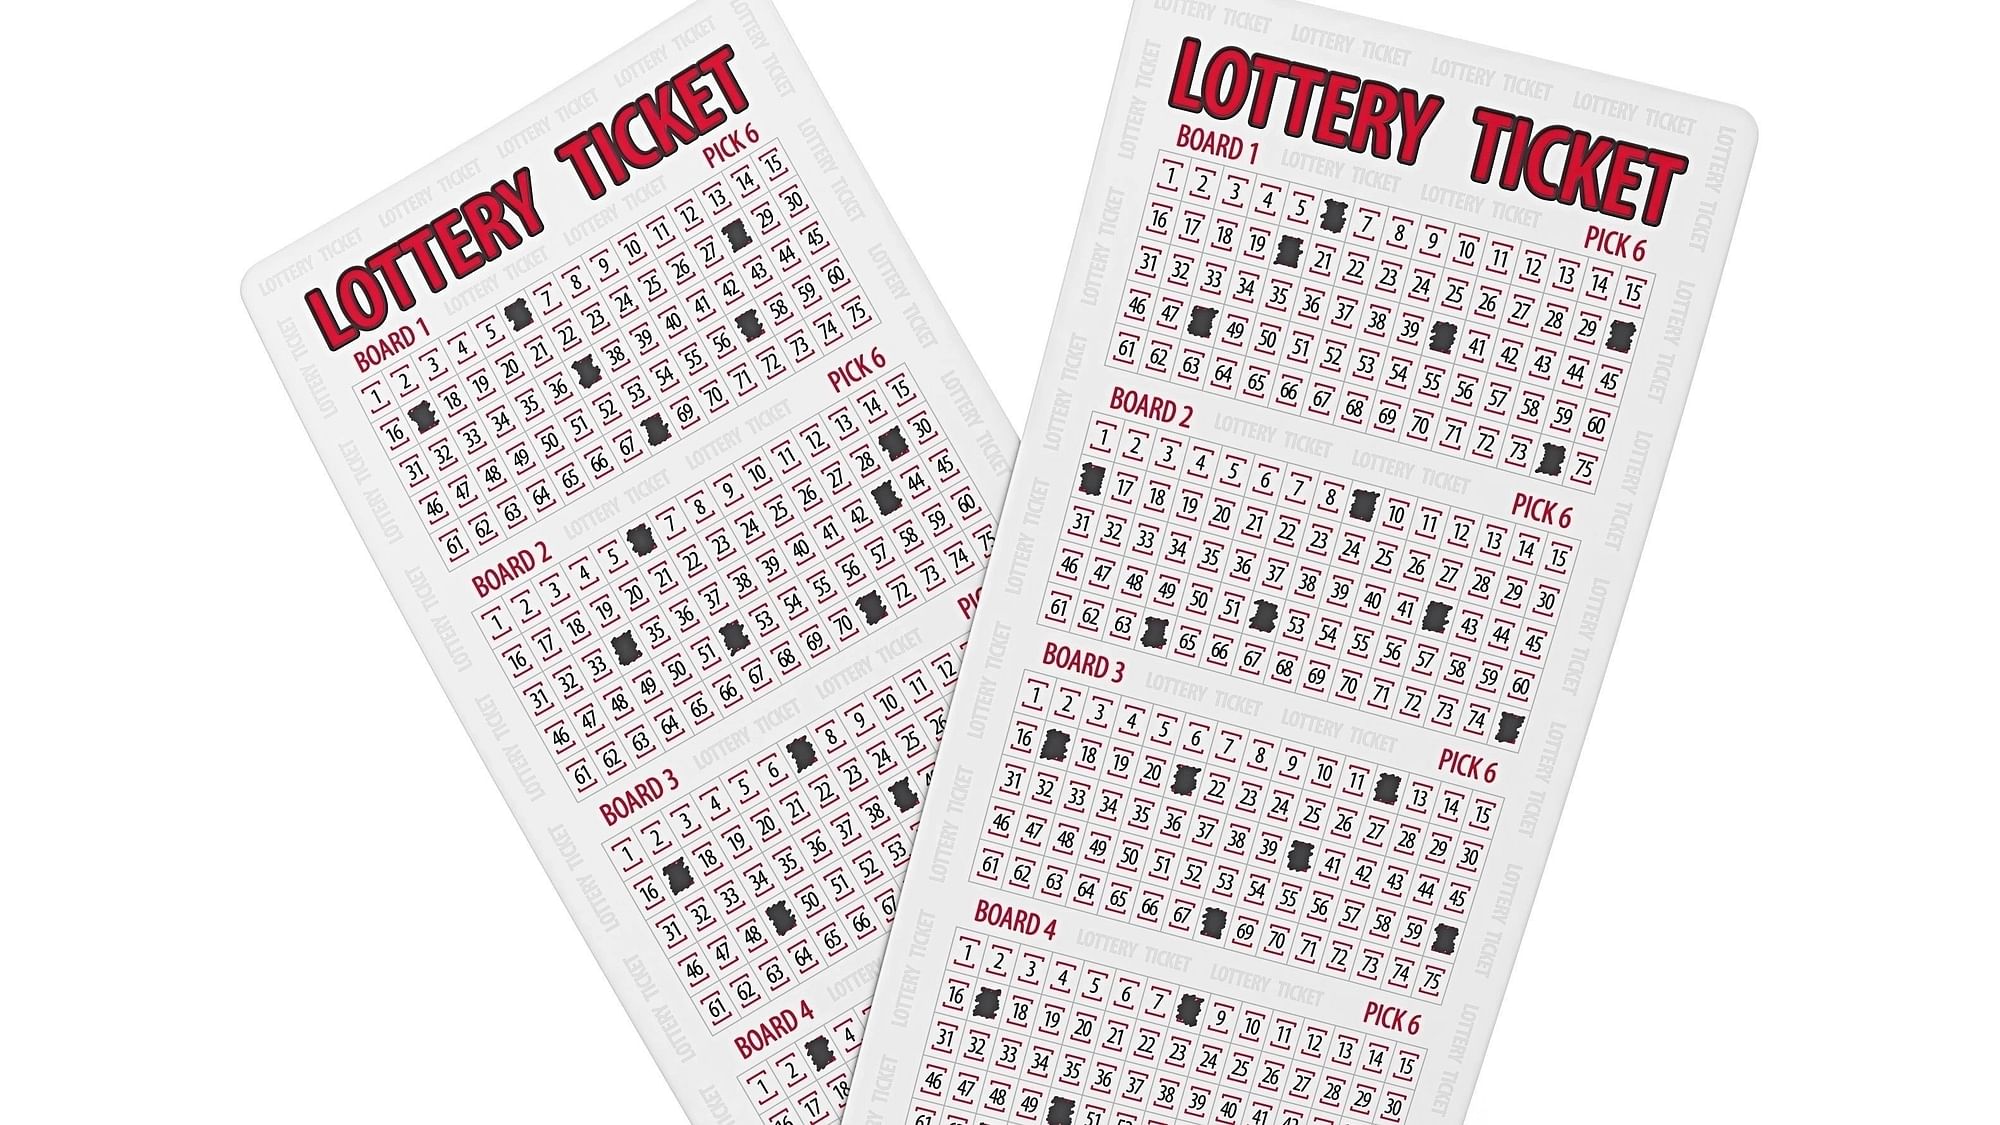 Punjab Lottery Today! Are You In The List? December Winners Announced!